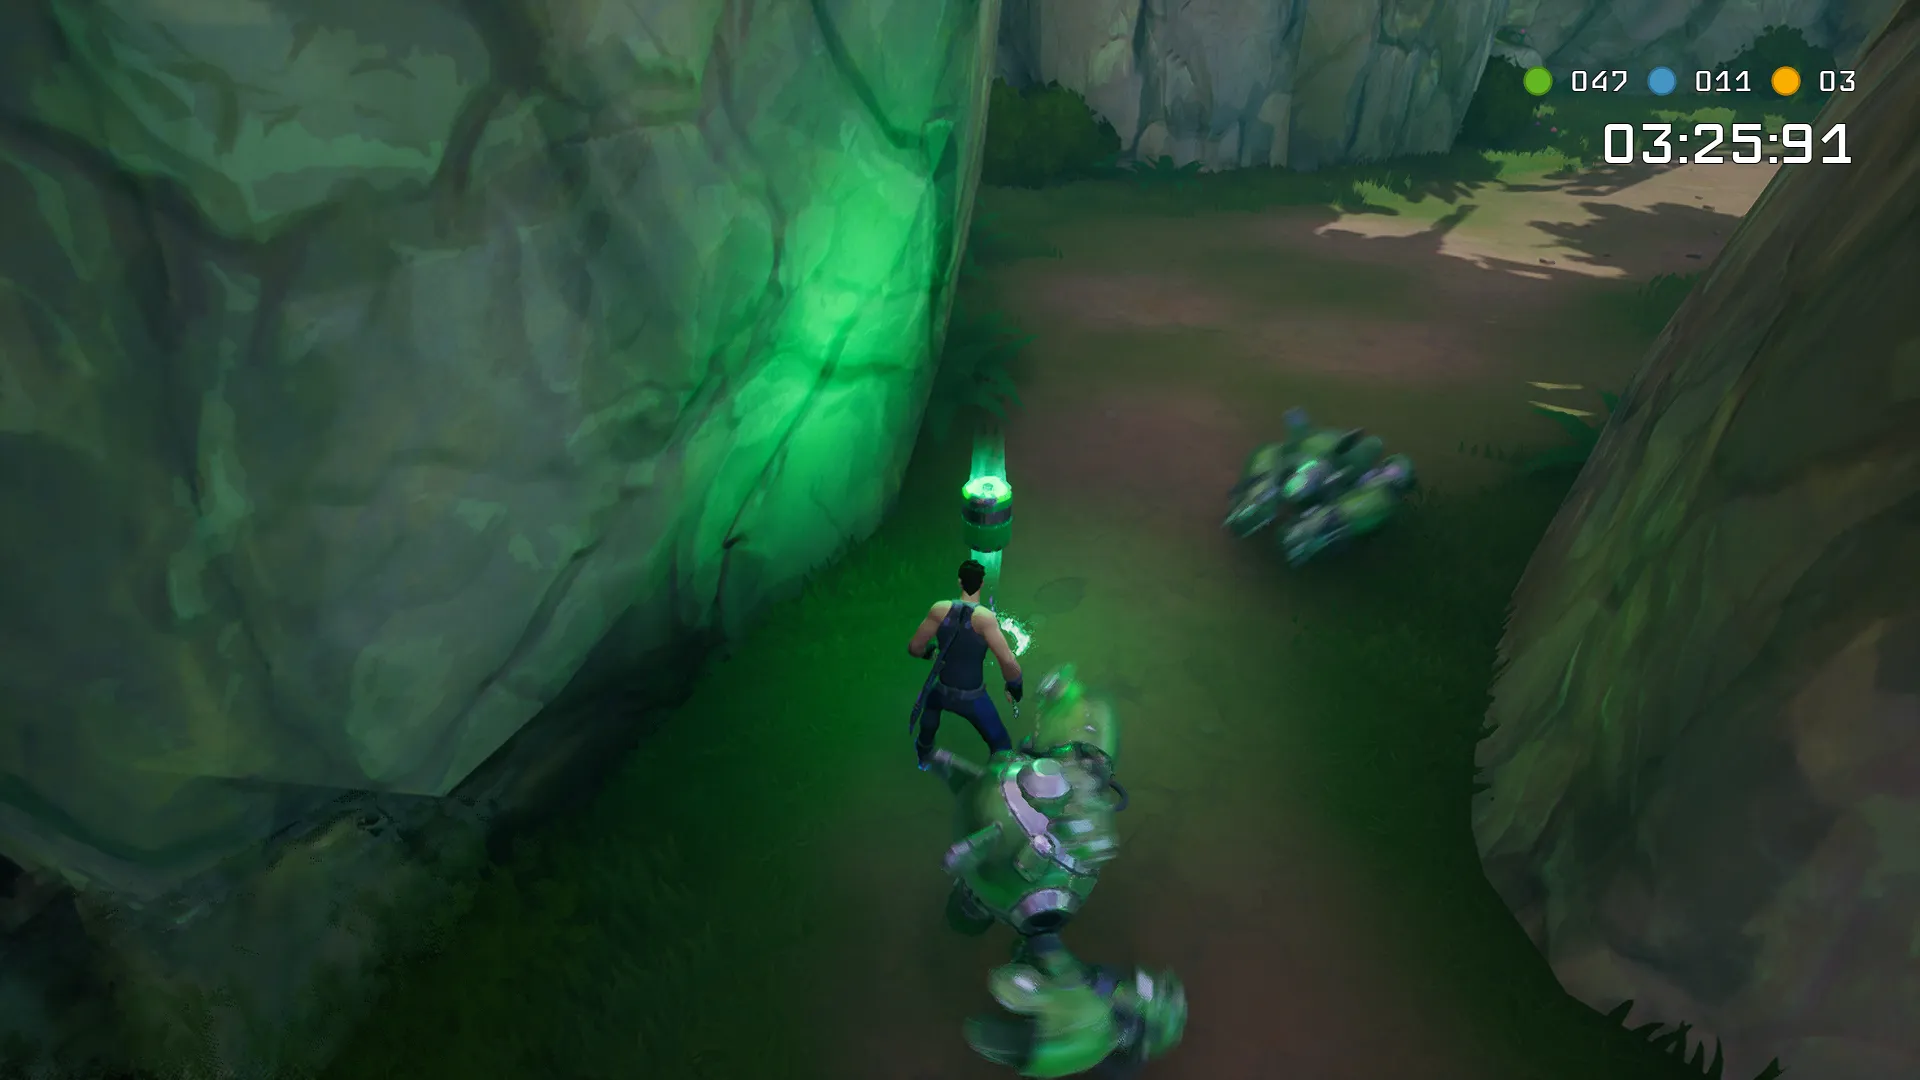 The Orbs Container holds a large number of orbs. Players need to attack the containers to gain the orbs. There are three types of orbs containers. 